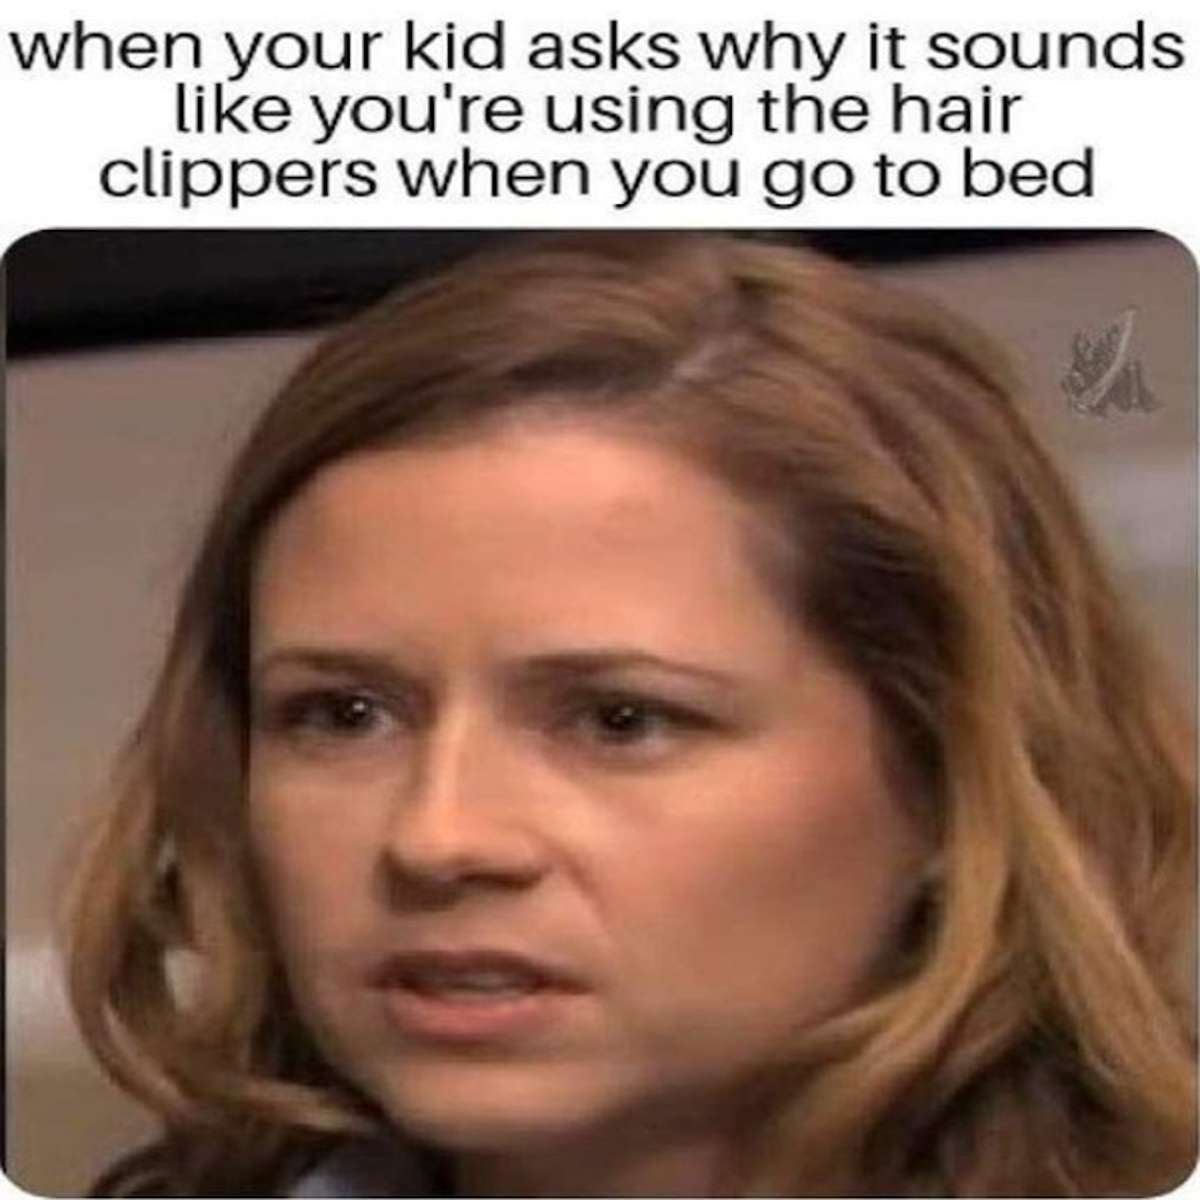 fresh memes - photo caption - when your kid asks why it sounds you're using the hair clippers when you go to bed